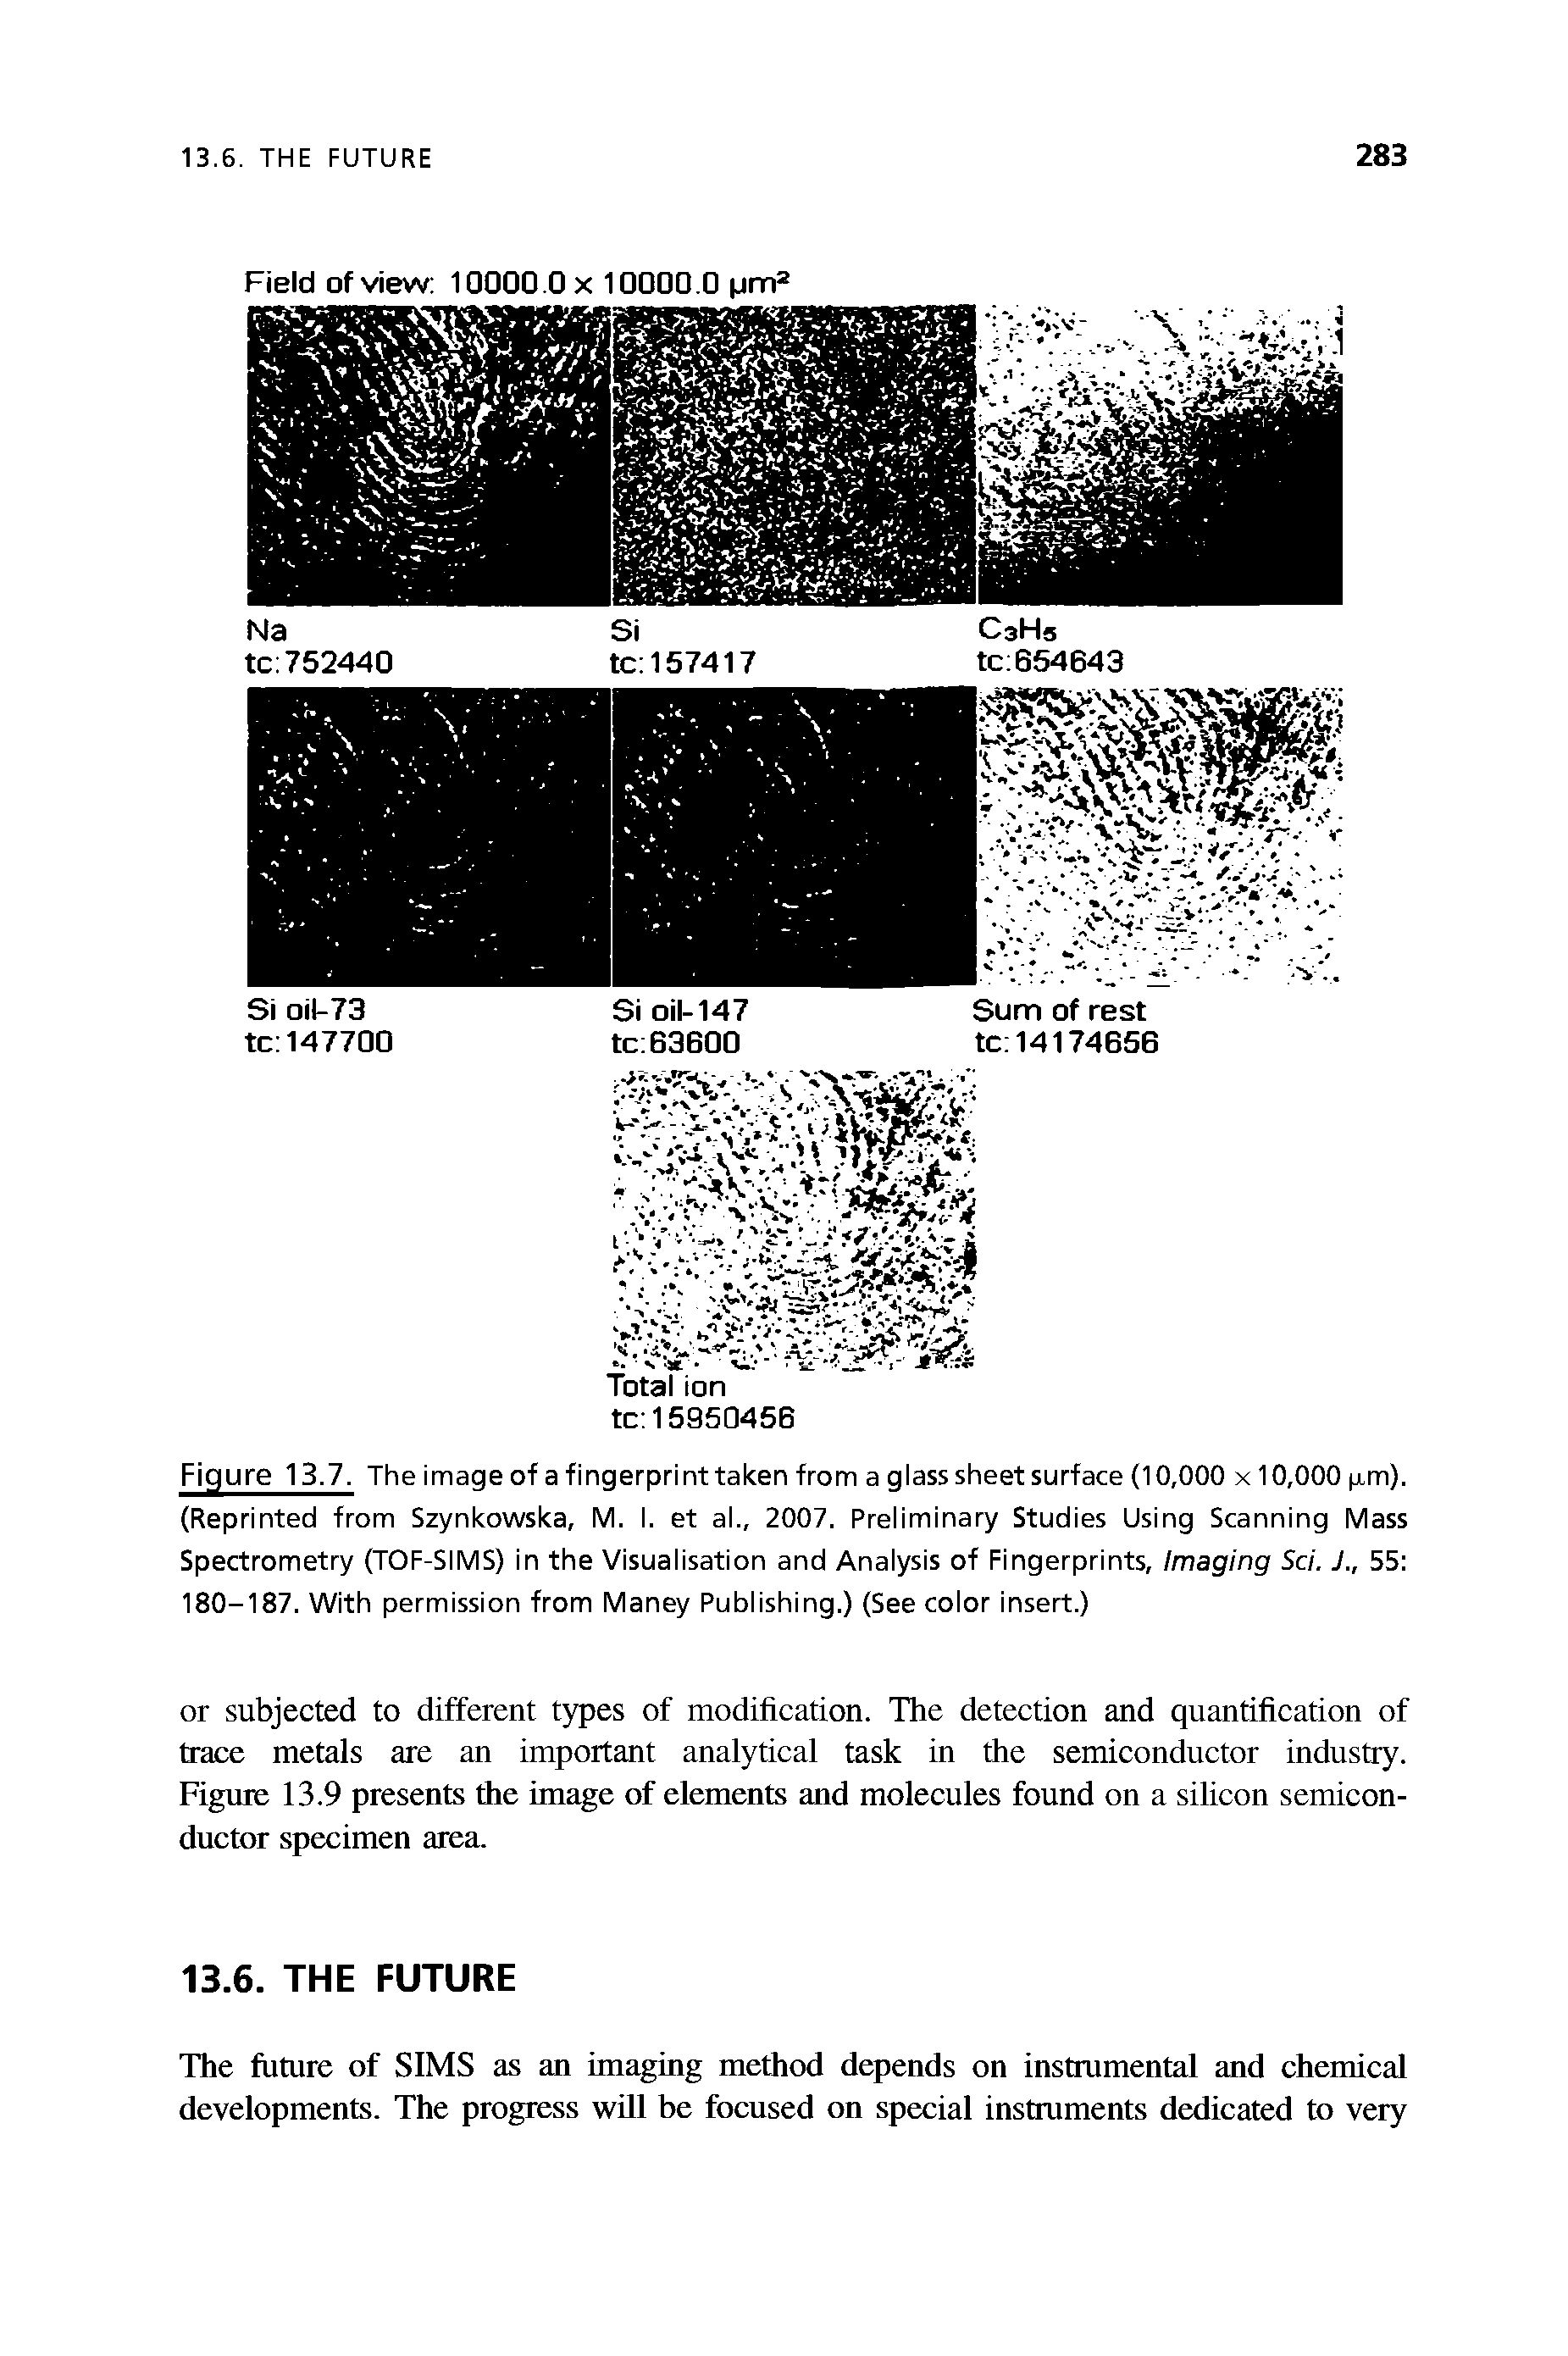 Figure 13.7. The image of a fingerprint taken from a glass sheet surface (10,000 x 10,000 j,m). (Reprinted from Szynkowska, M. I. et al., 2007. Preliminary Studies Using Scanning Mass Spectrometry (TOF-SIMS) in the Visualisation and Analysis of Fingerprints, Imaging Sci. J., 55 180-187. With permission from Maney Publishing.) (See color insert.)...